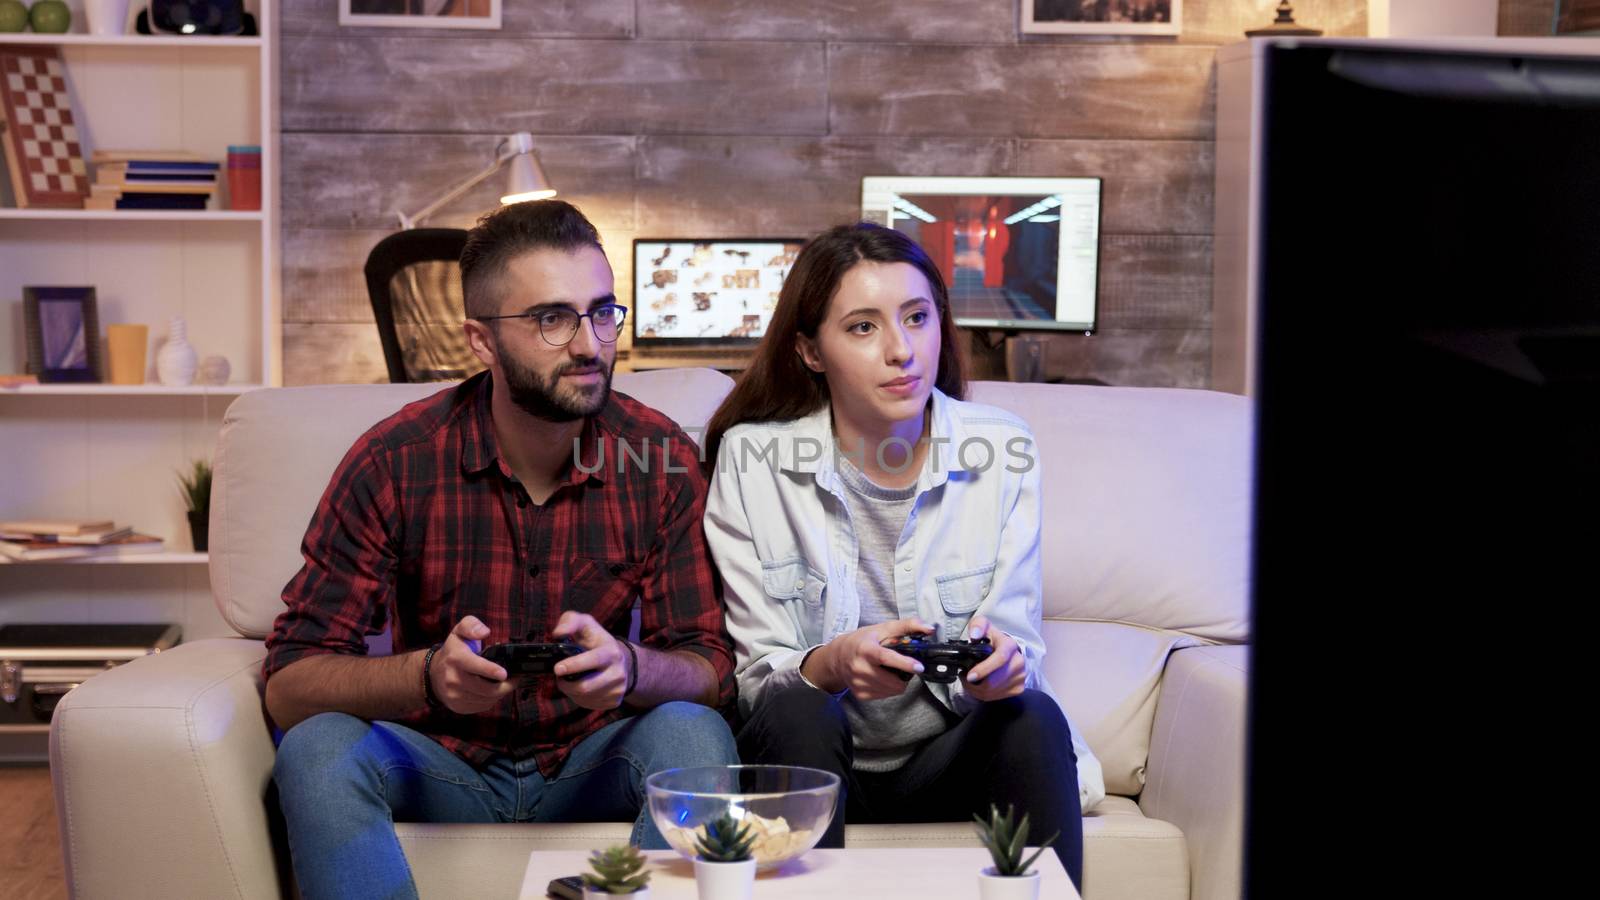 Couple giving high five after playing video games on television.